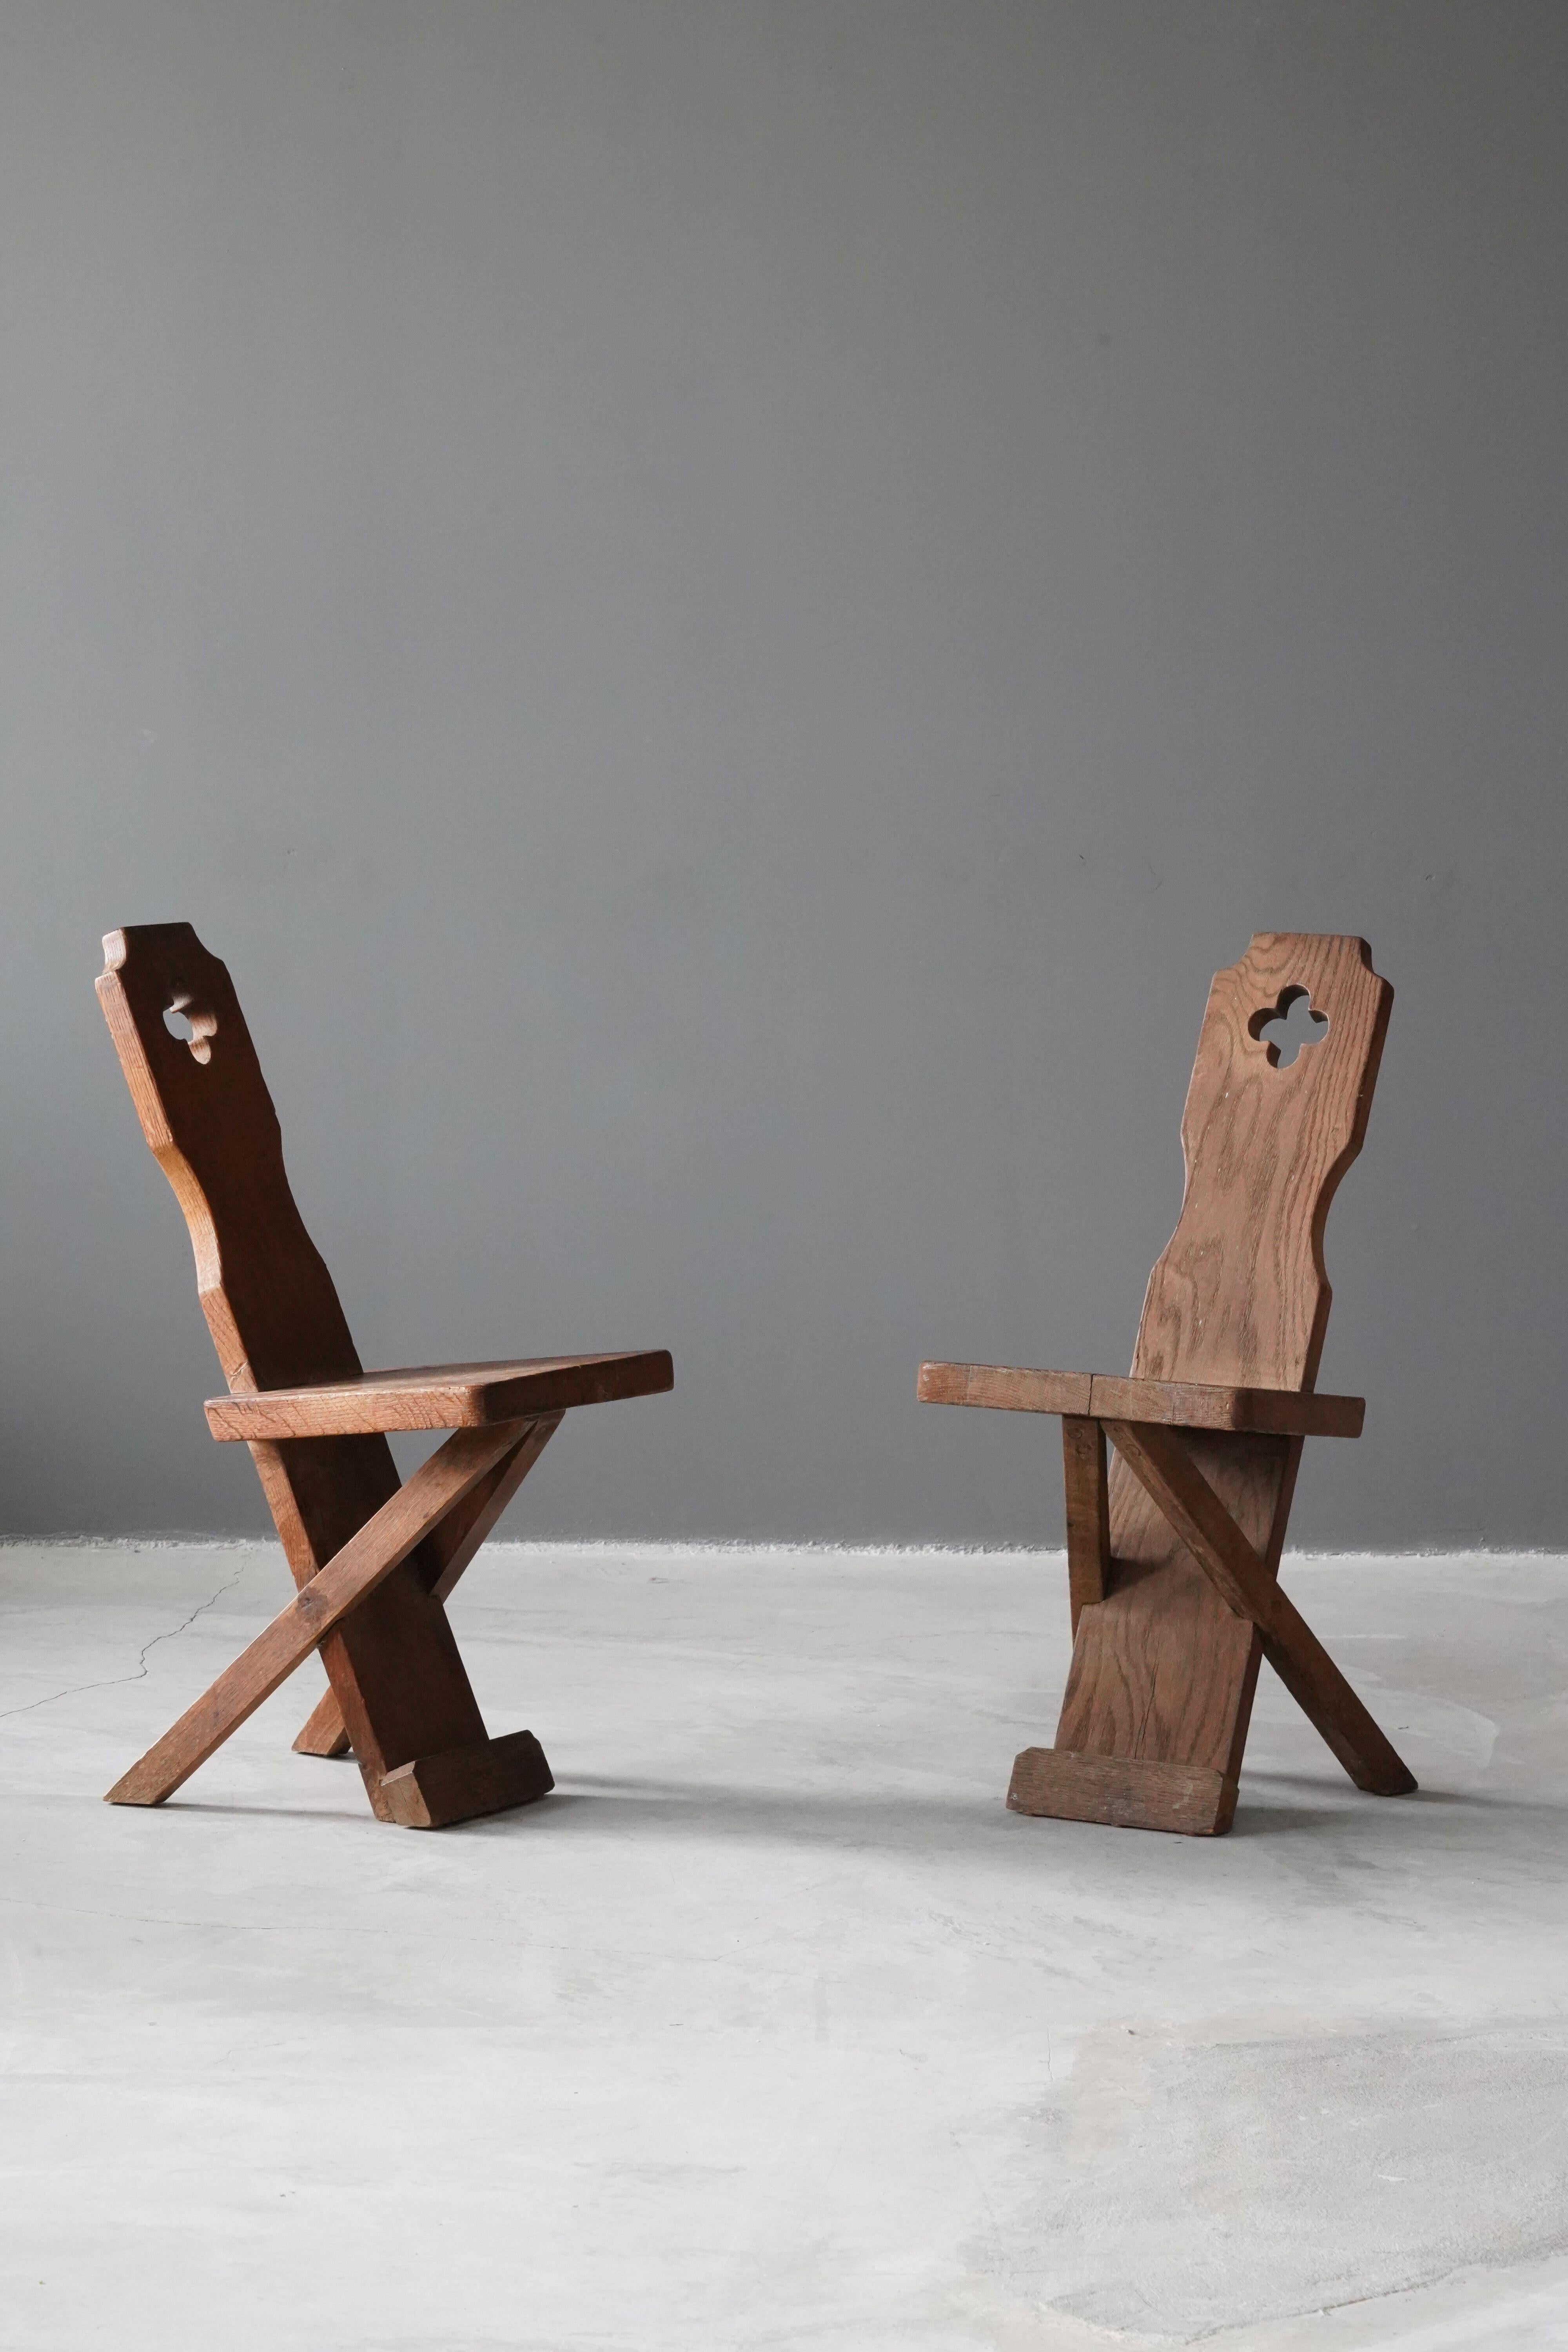 A pair of side chairs, designed and produced in Denmark, 1930s-1940s. In solid carved oak. 

Other designers of the period include Axel Einar Hjorth, Frank Lloyd Wright, Emile Jacques Ruhlmann, and Eliel Saarinen.